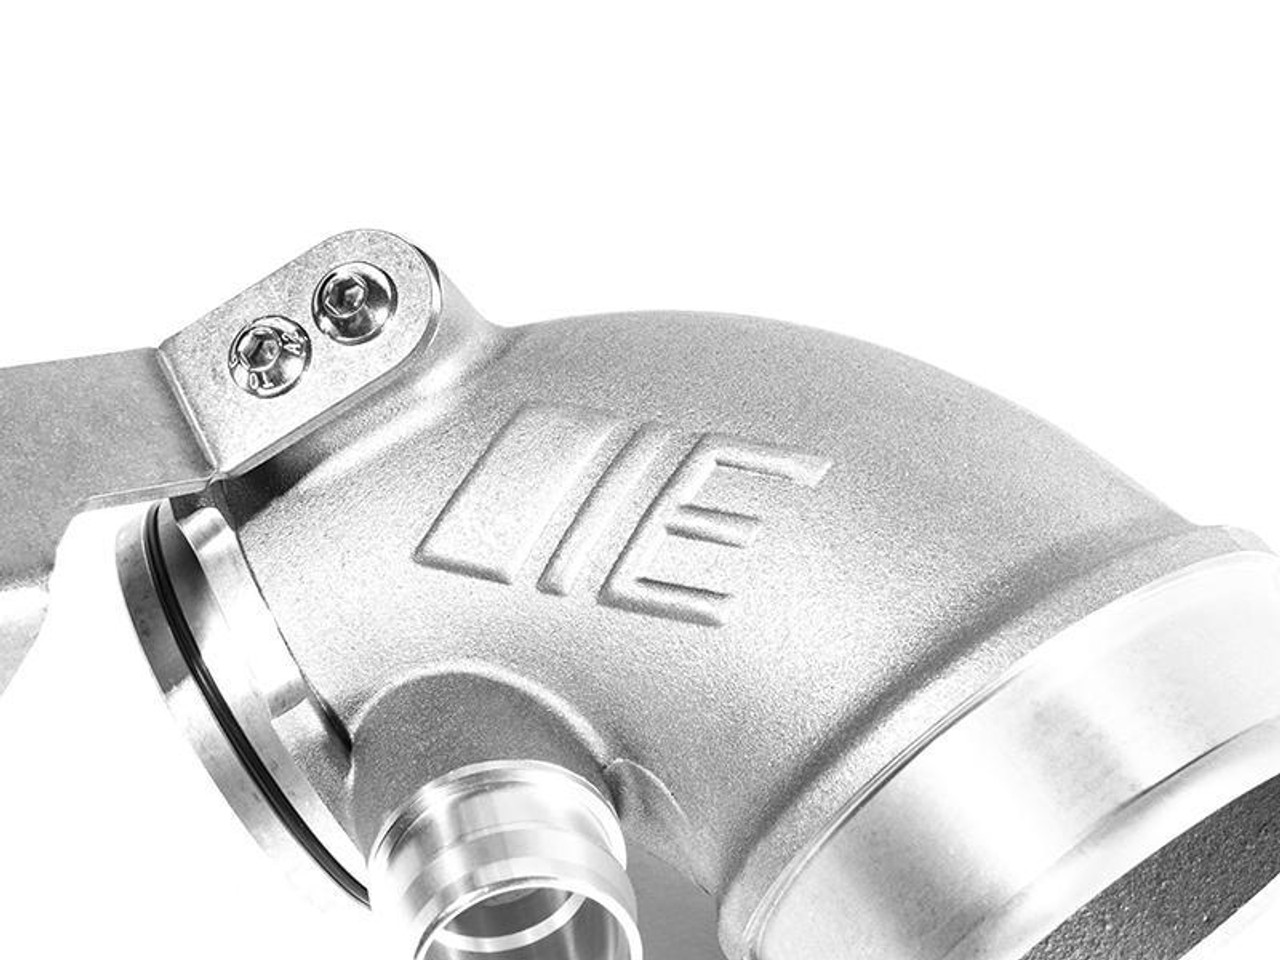 IE Turbo Inlet Pipe for VW & Audi 2.0T/1.8T Gen 3 Engines